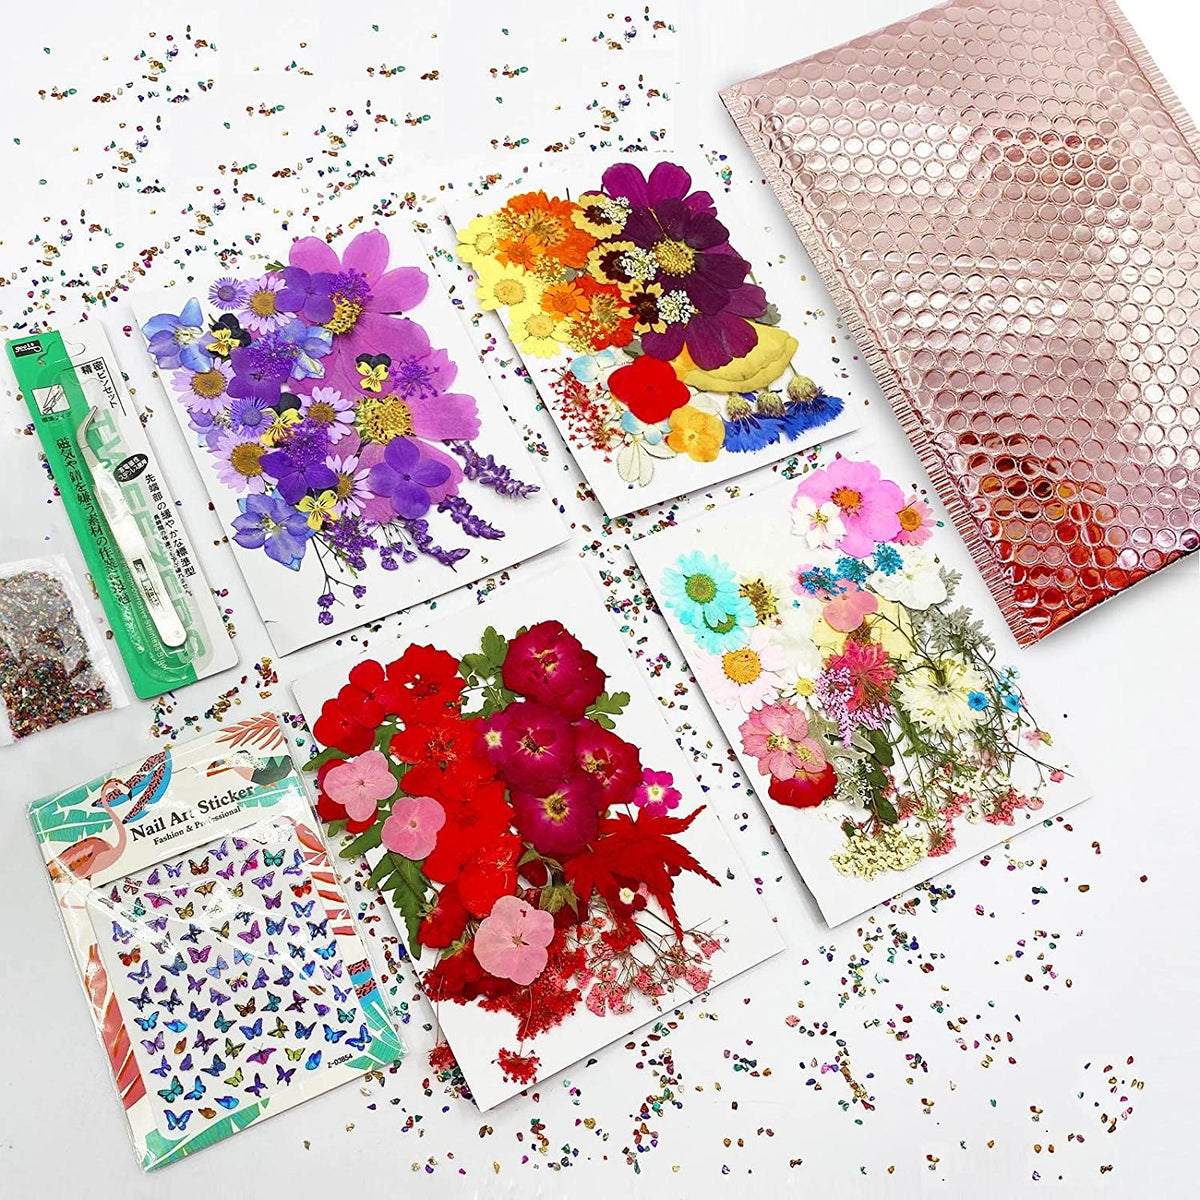 AINAZ 154 Pcs Natural Dried Pressed Flowers for Resin Molds